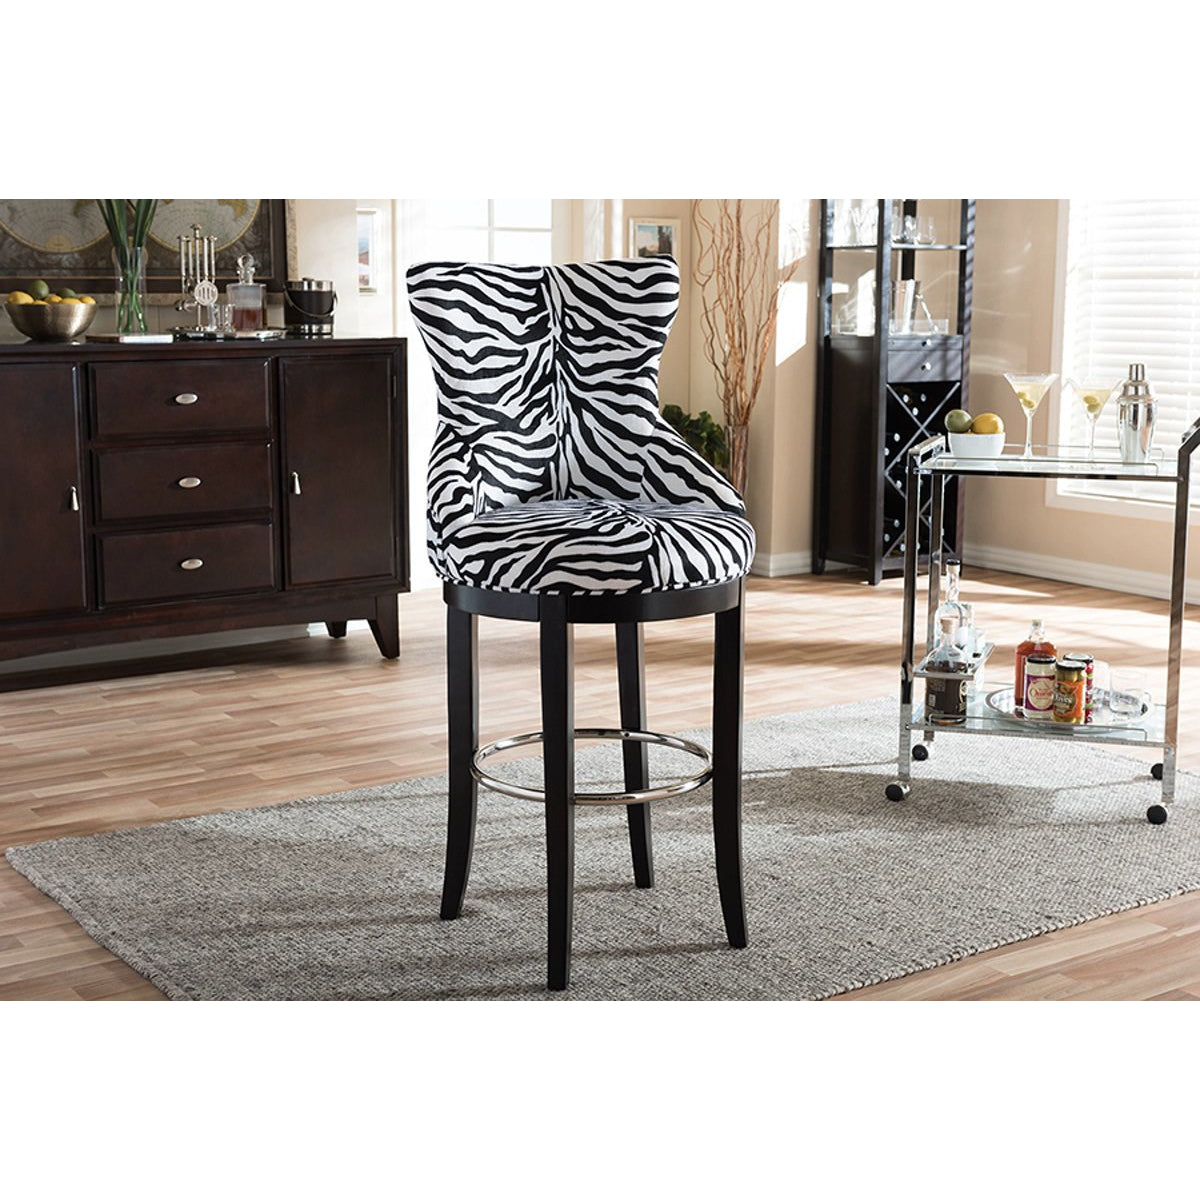 Baxton Studio Peace Modern and Contemporary Zebra-print Patterned Fabric Upholstered Bar Stool with Metal Footrest Baxton Studio-Bar Stools-Minimal And Modern - 6